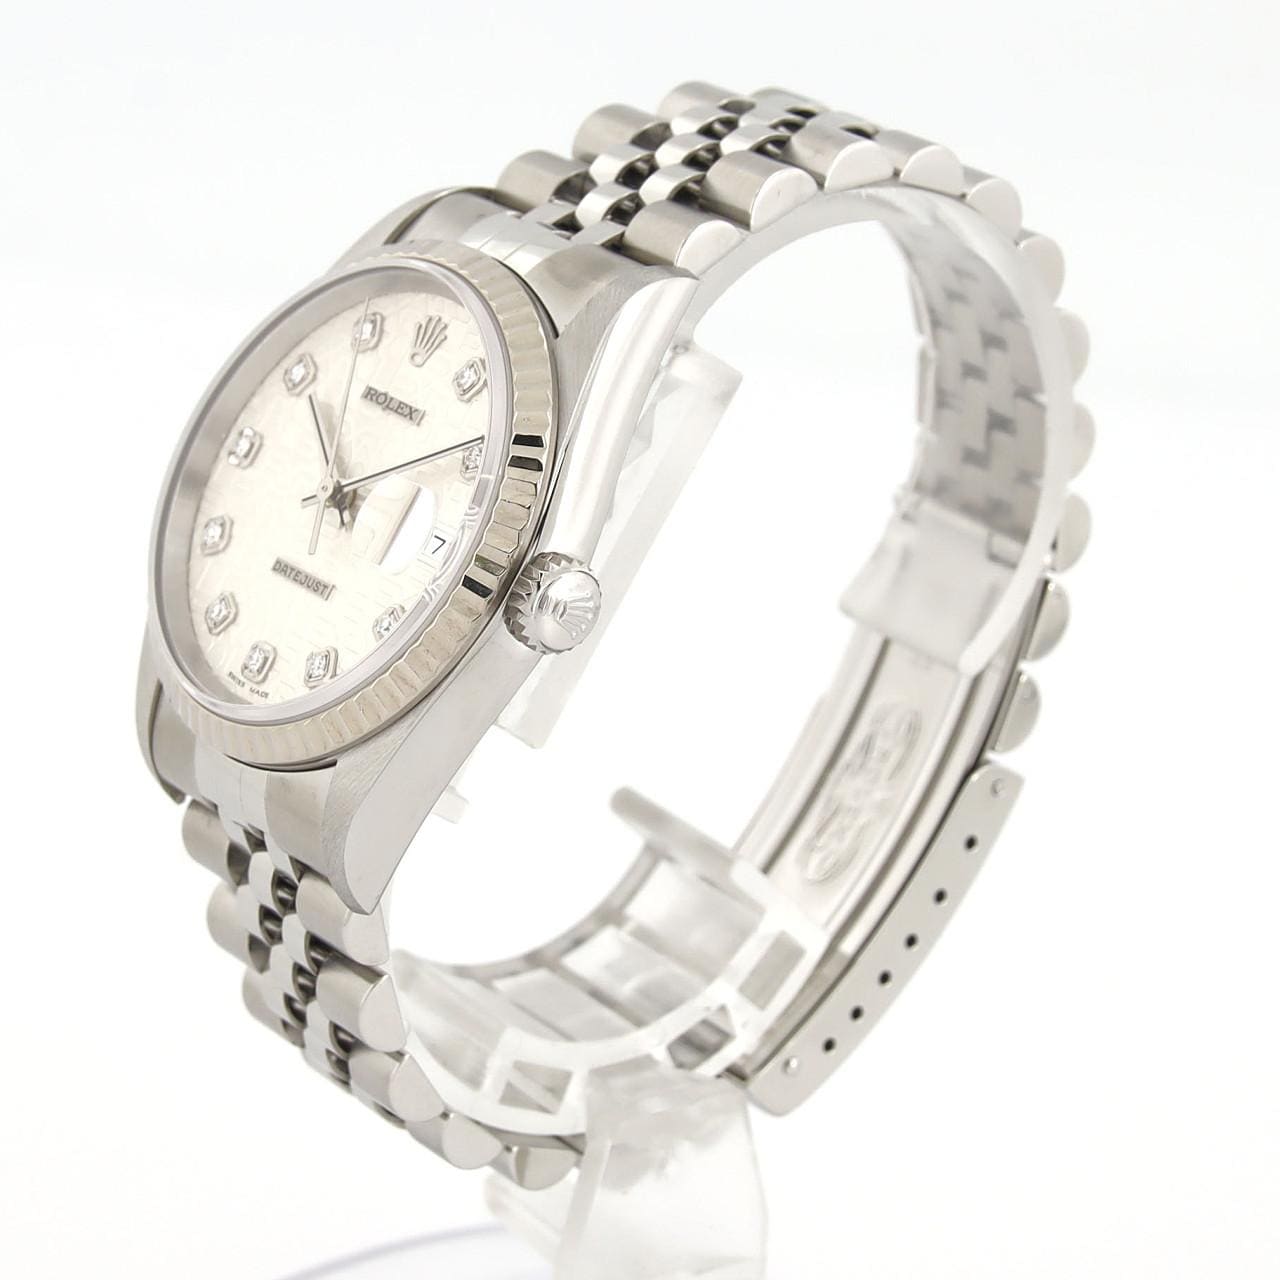 ROLEX Datejust 16234G SSxWG Automatic K number